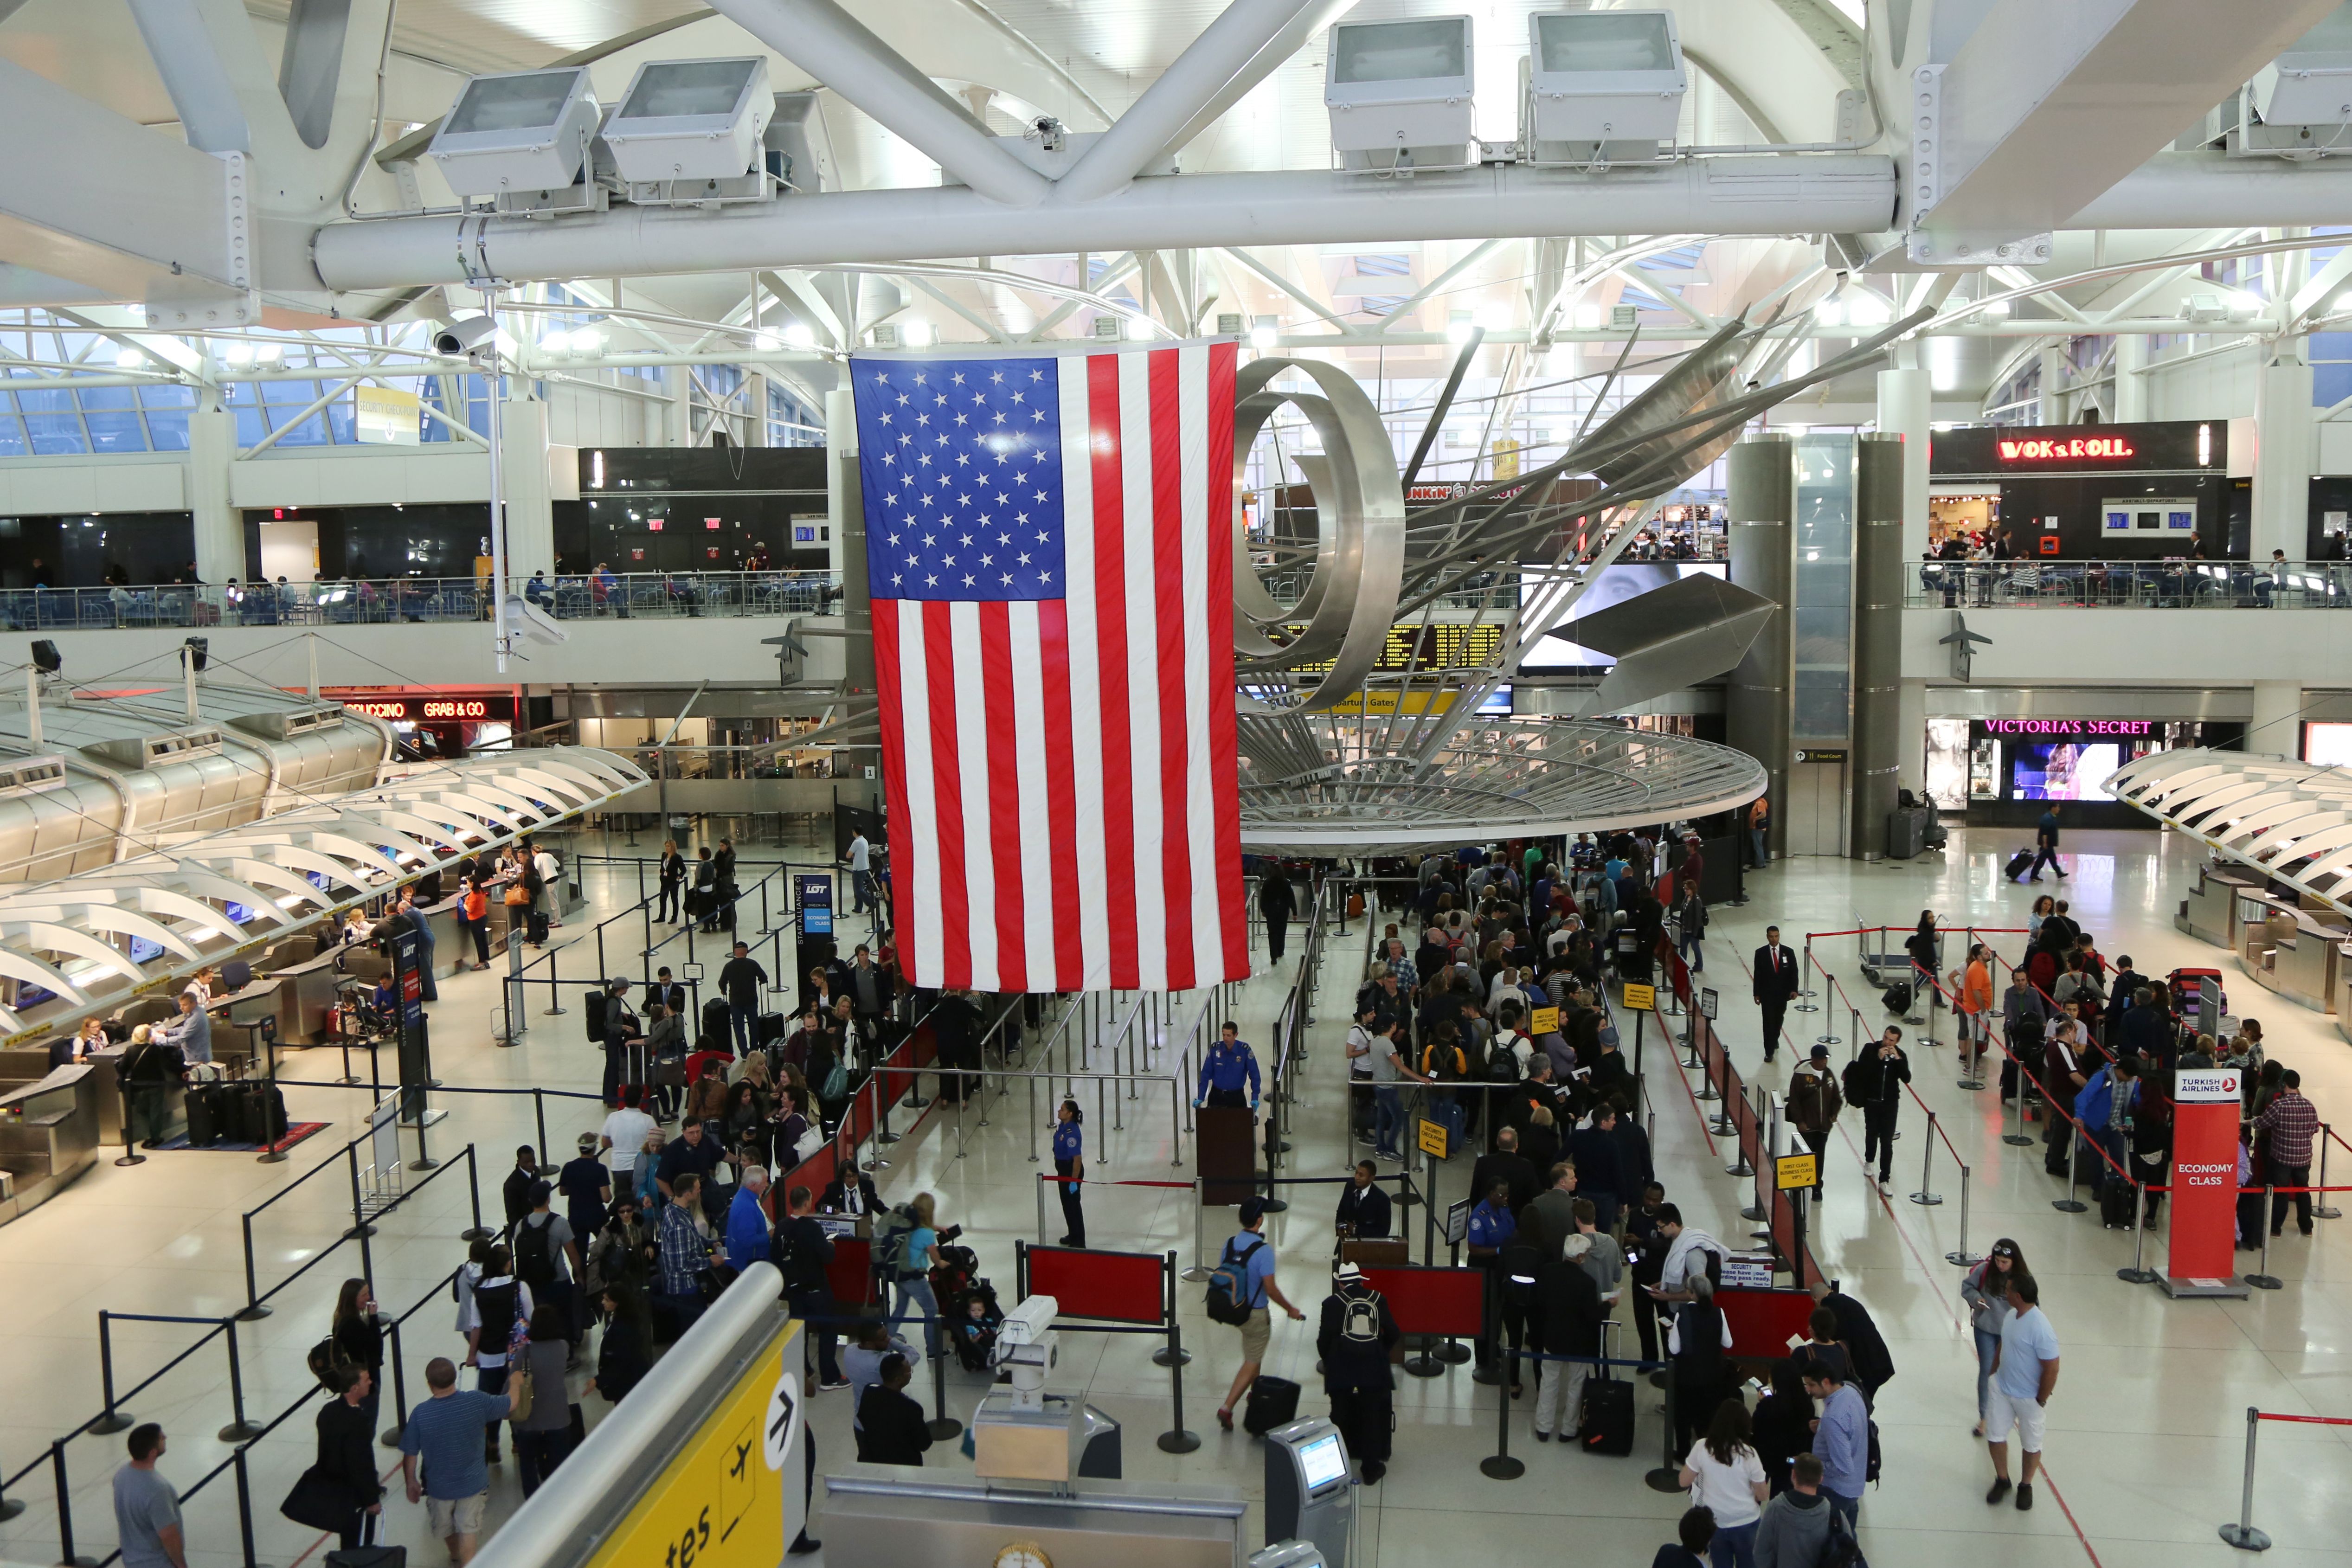 An aerial view of an American airport terminal building, overlooking the security area.